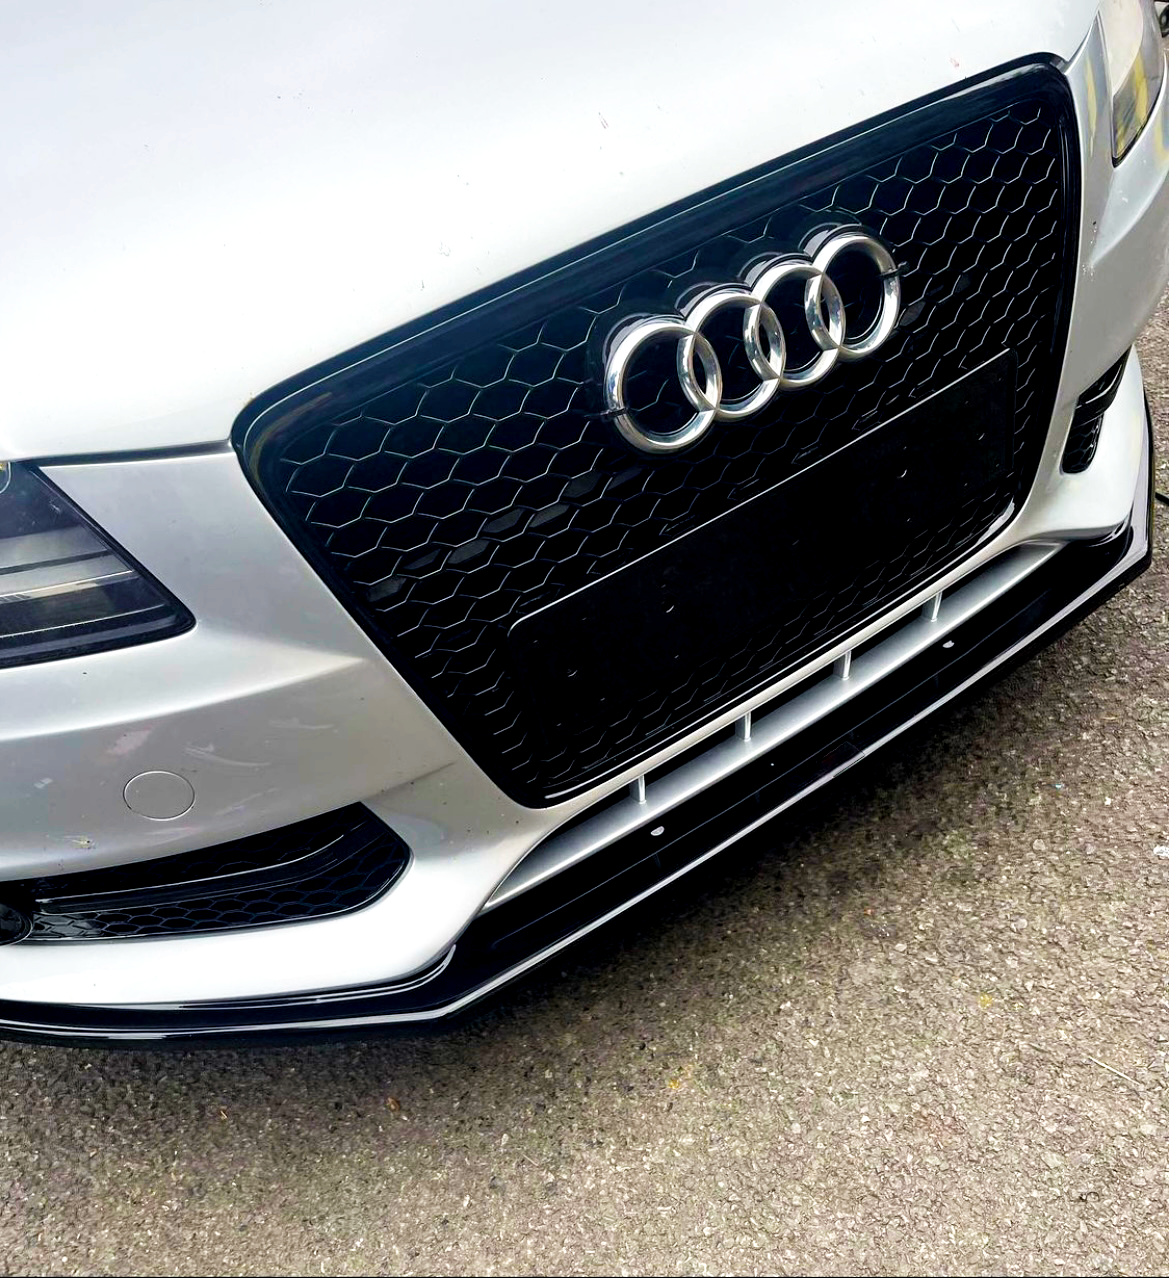 A4 - B8 Pre-Facelift: Gloss Black RS Honeycomb Grill 08-12